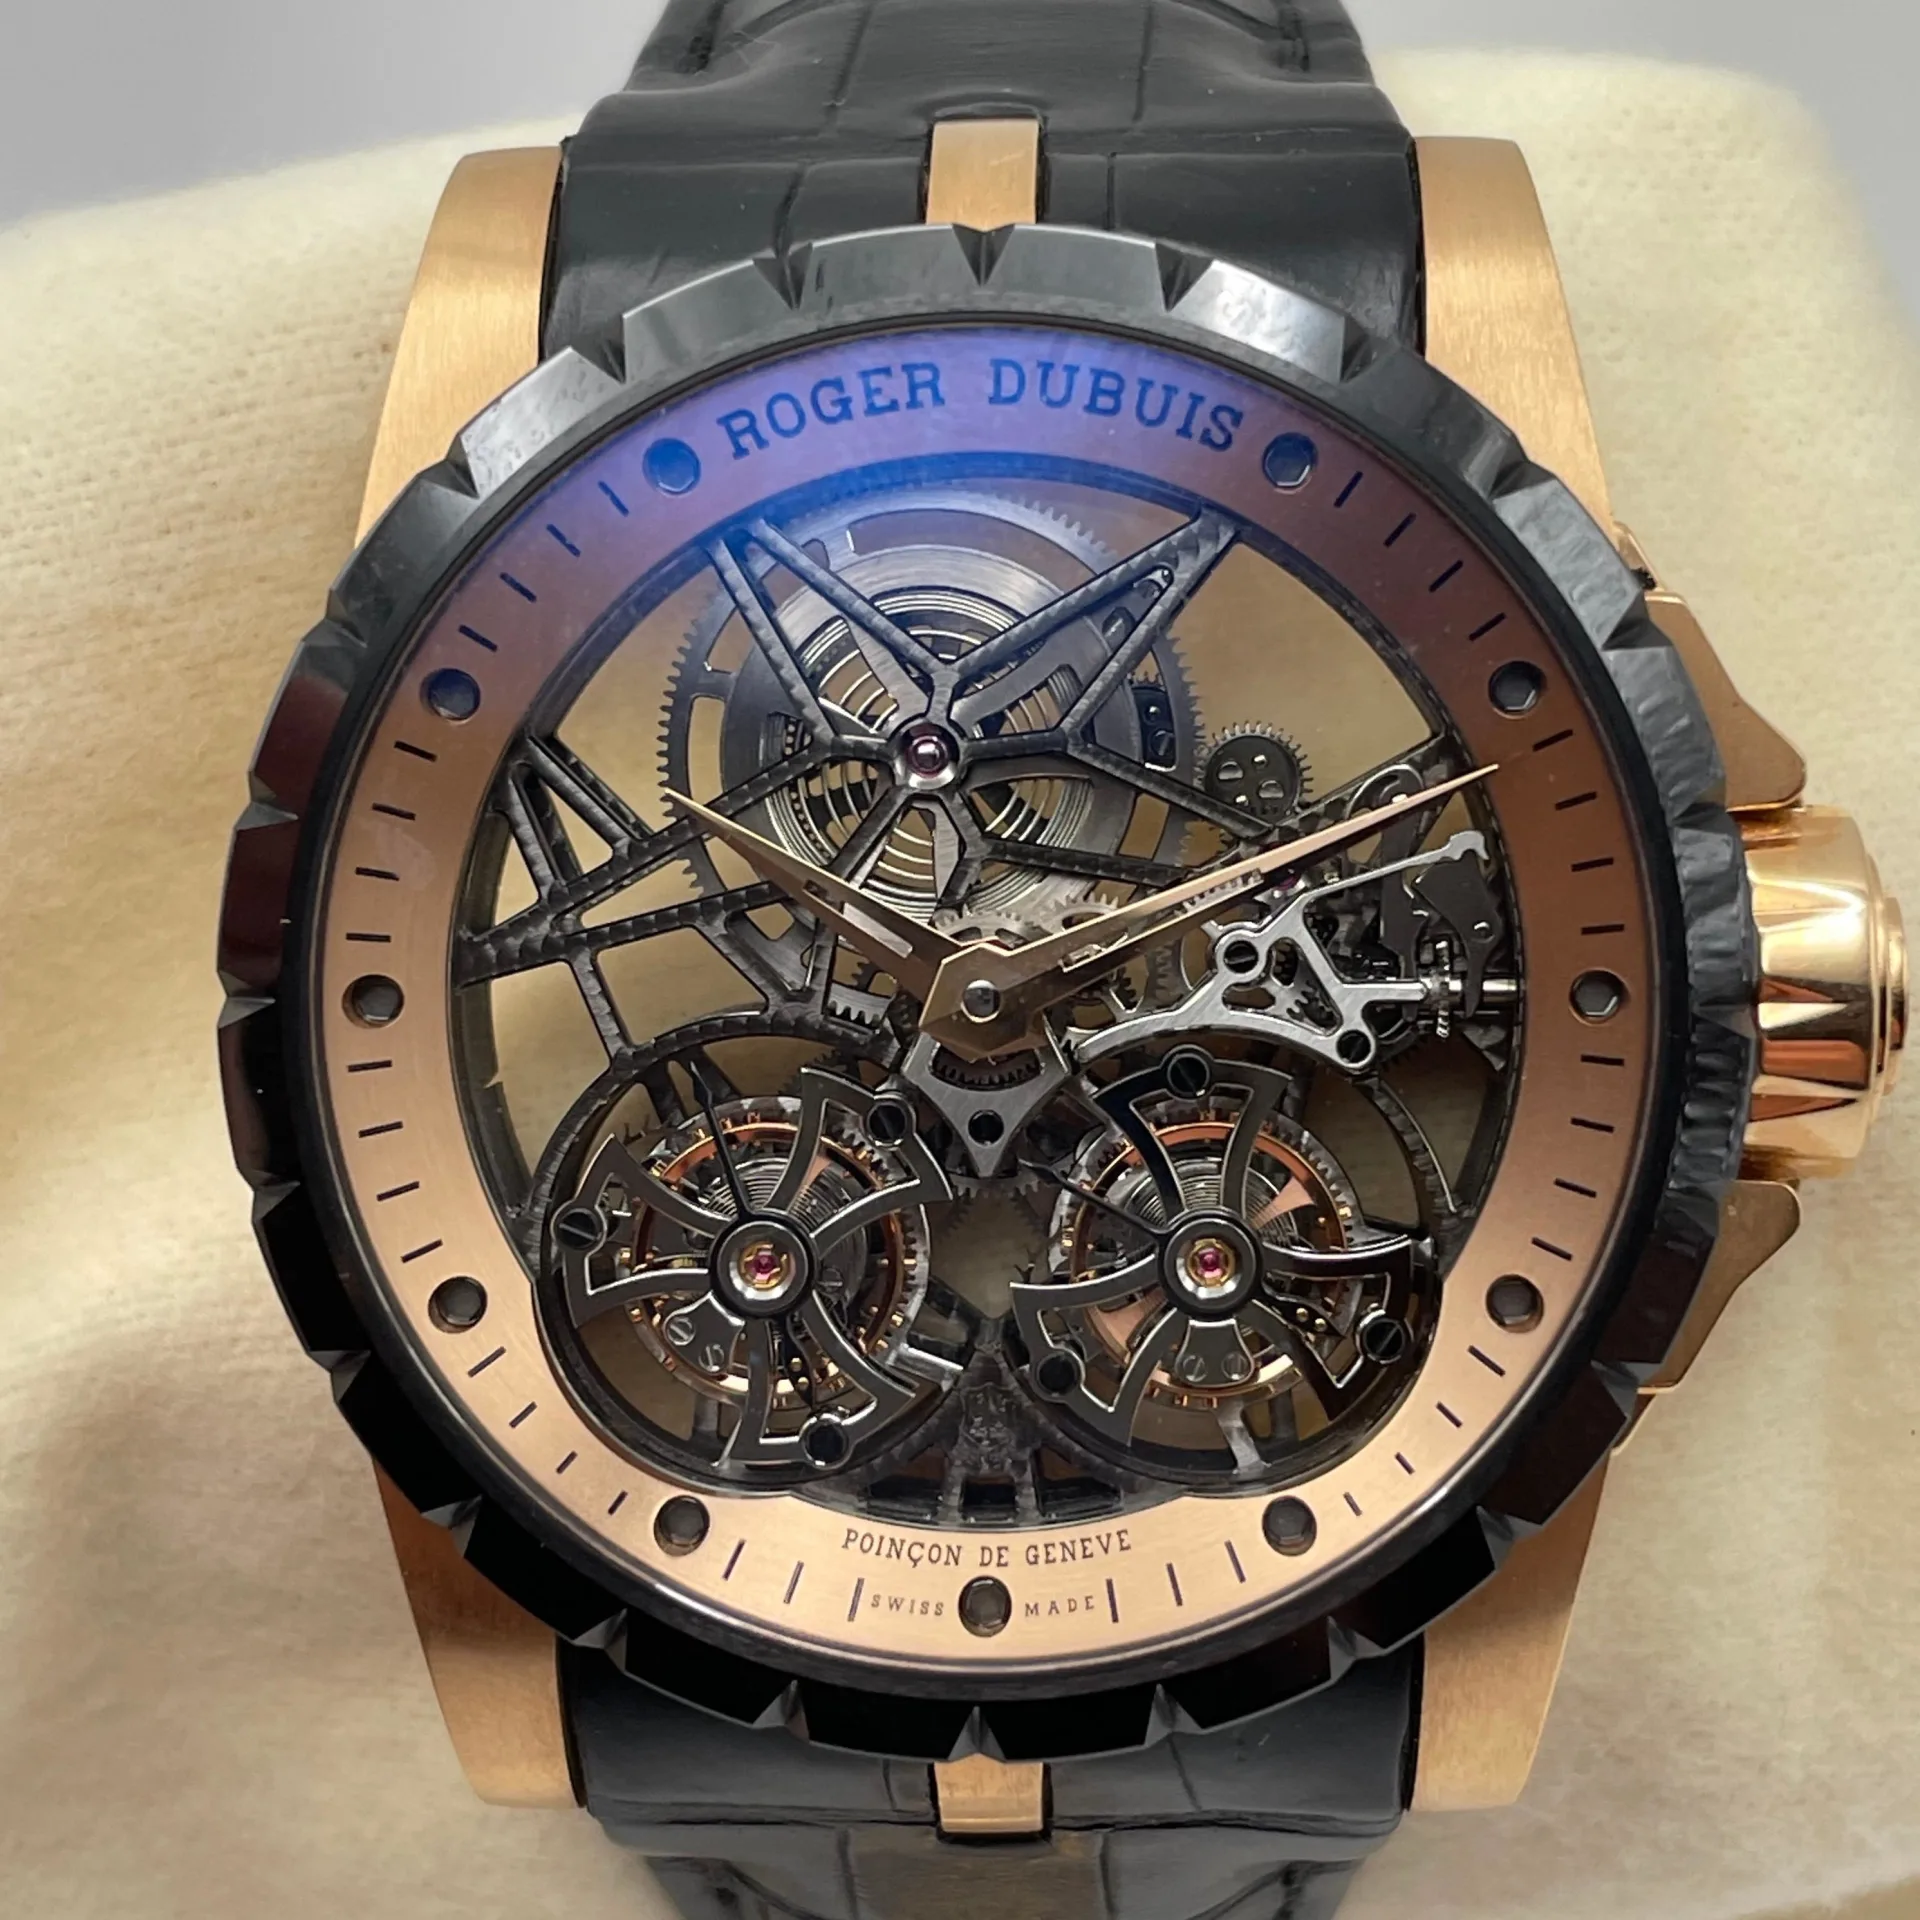 2013 Roger Dubuis Excalibur 45 Double Tourbillon - Limited Edition of 188 DBEX0397 Listing Image